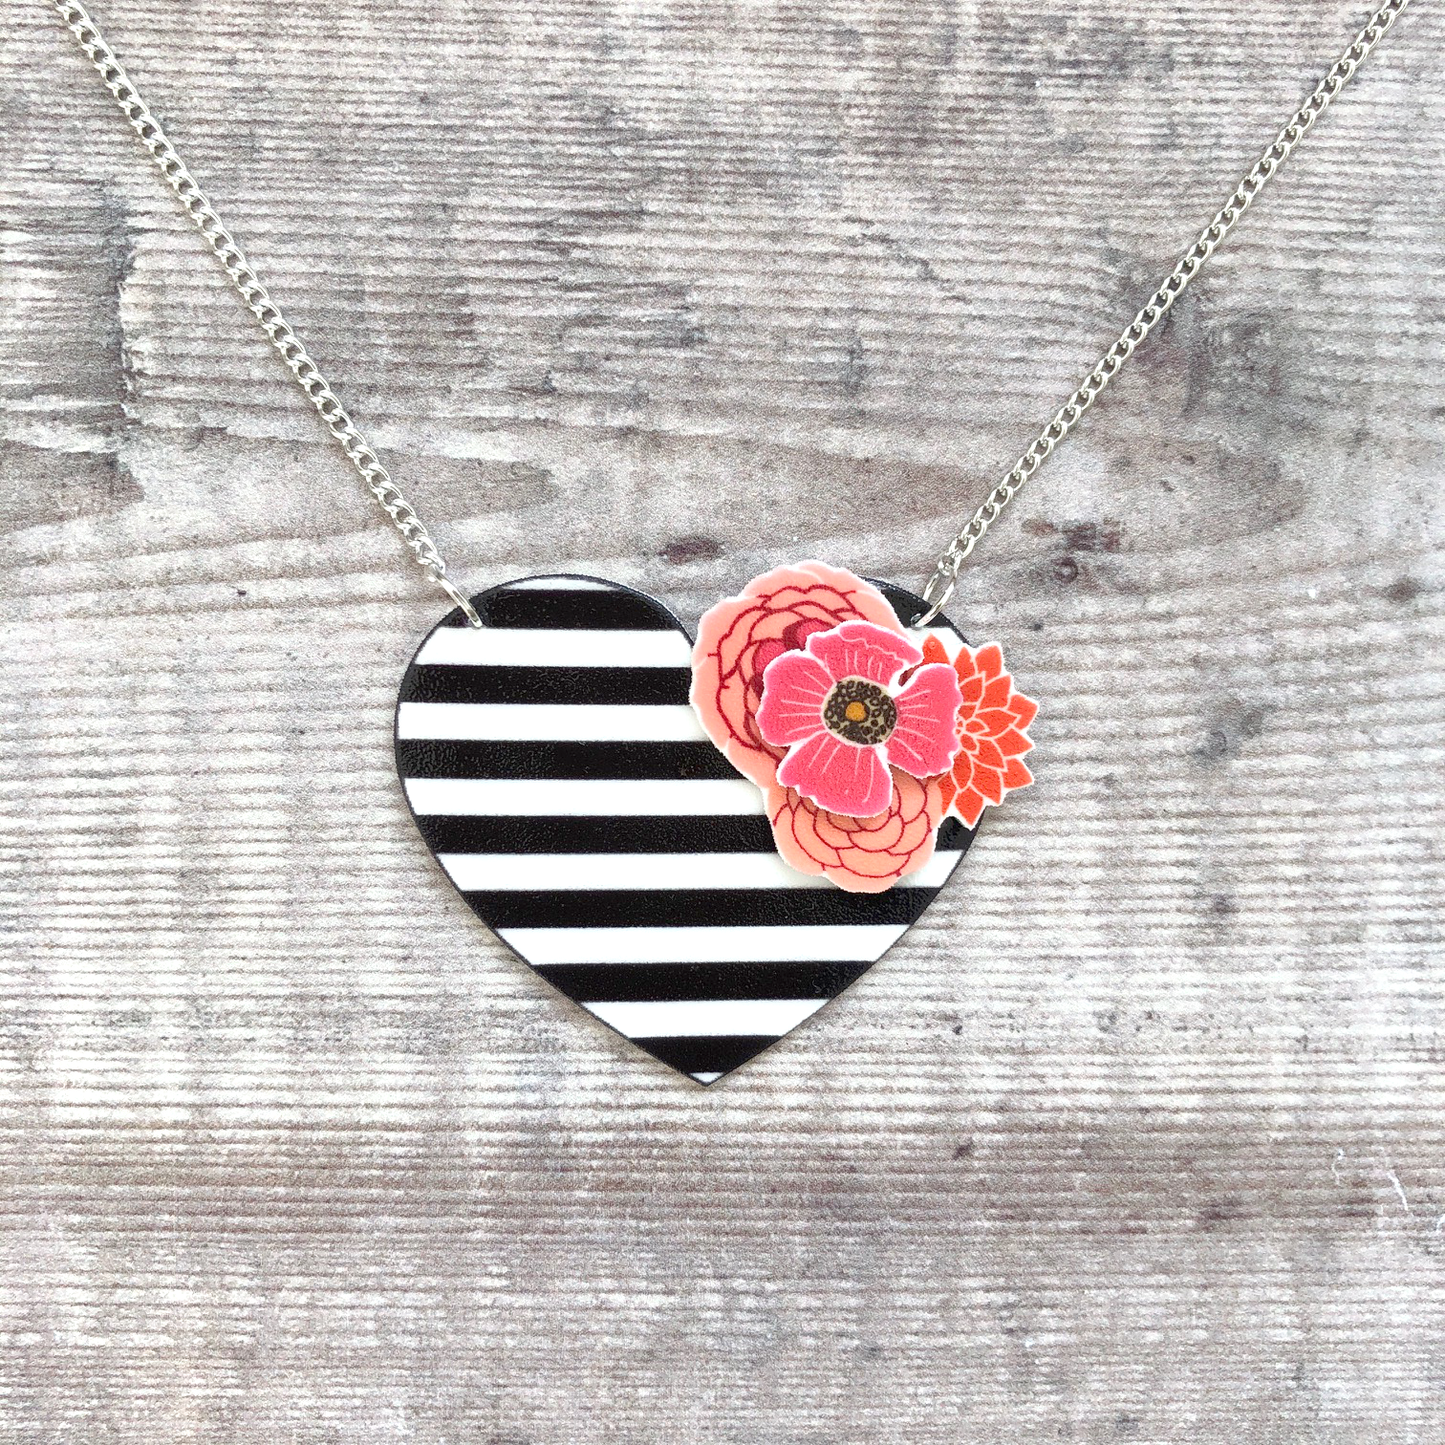 Striped heart necklace - Black and white - Valentine gift for her